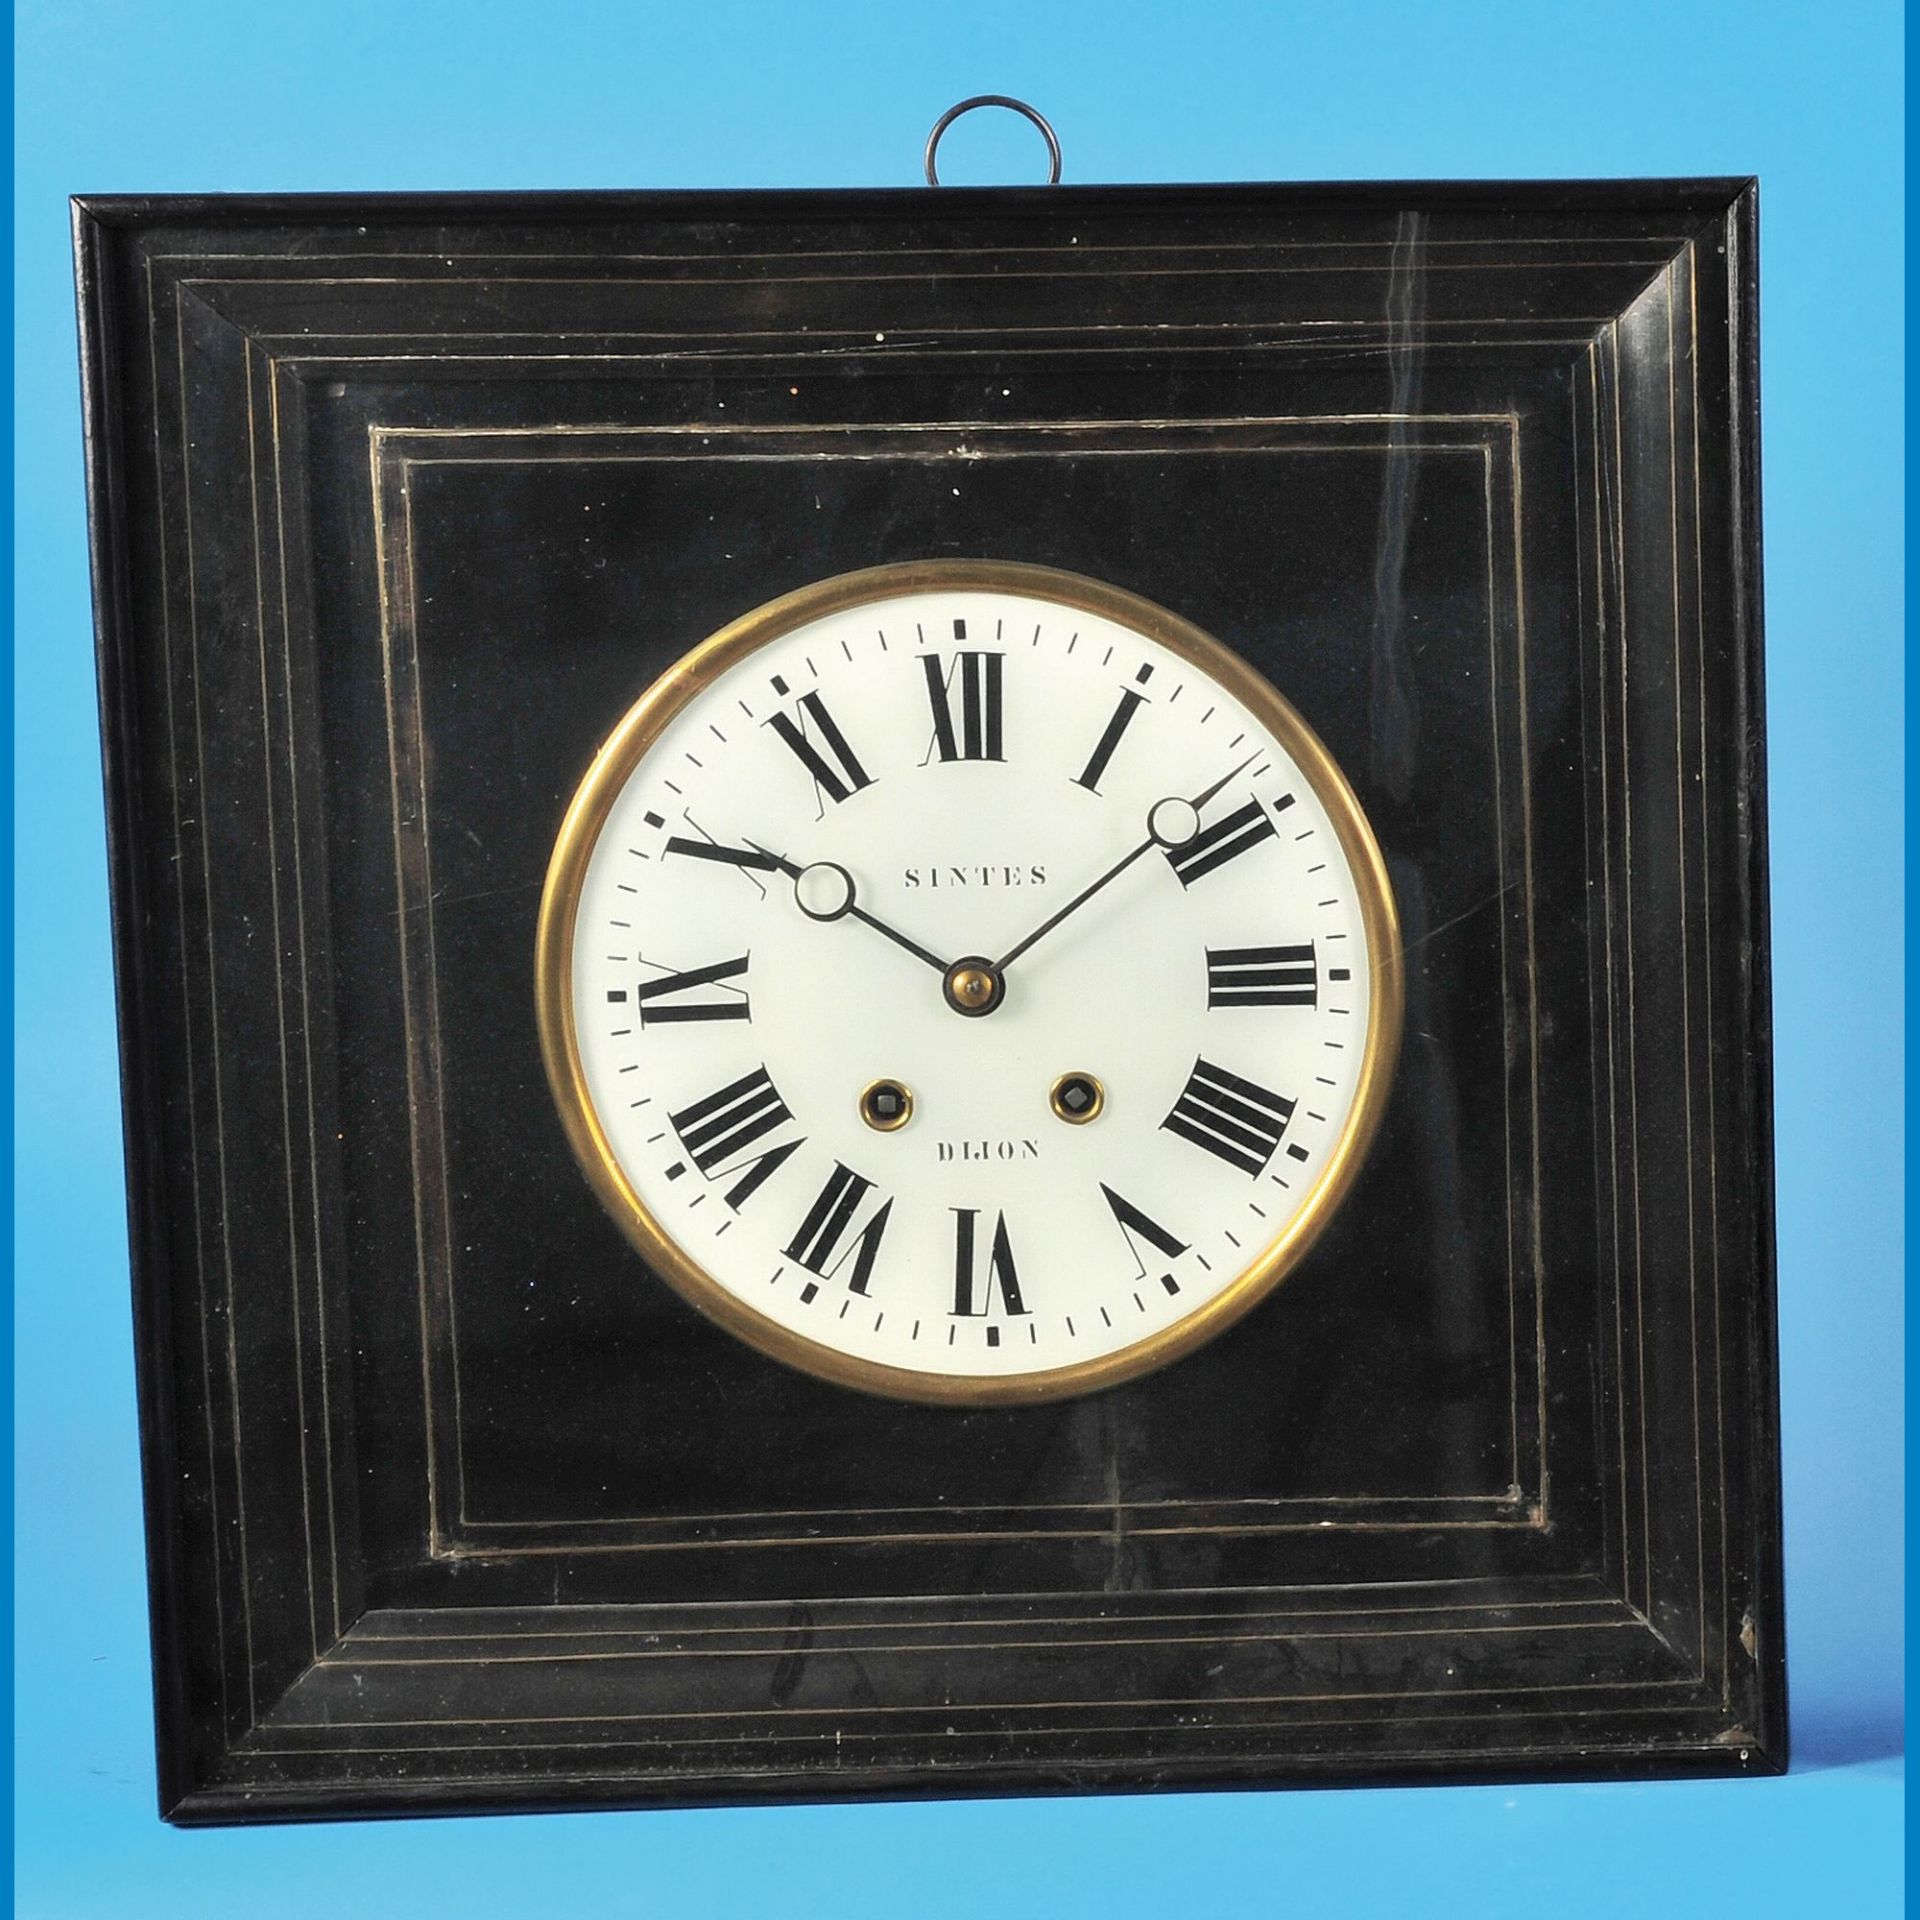 French square frame clock with half-hour strike on gong, signed Sintes Dijon